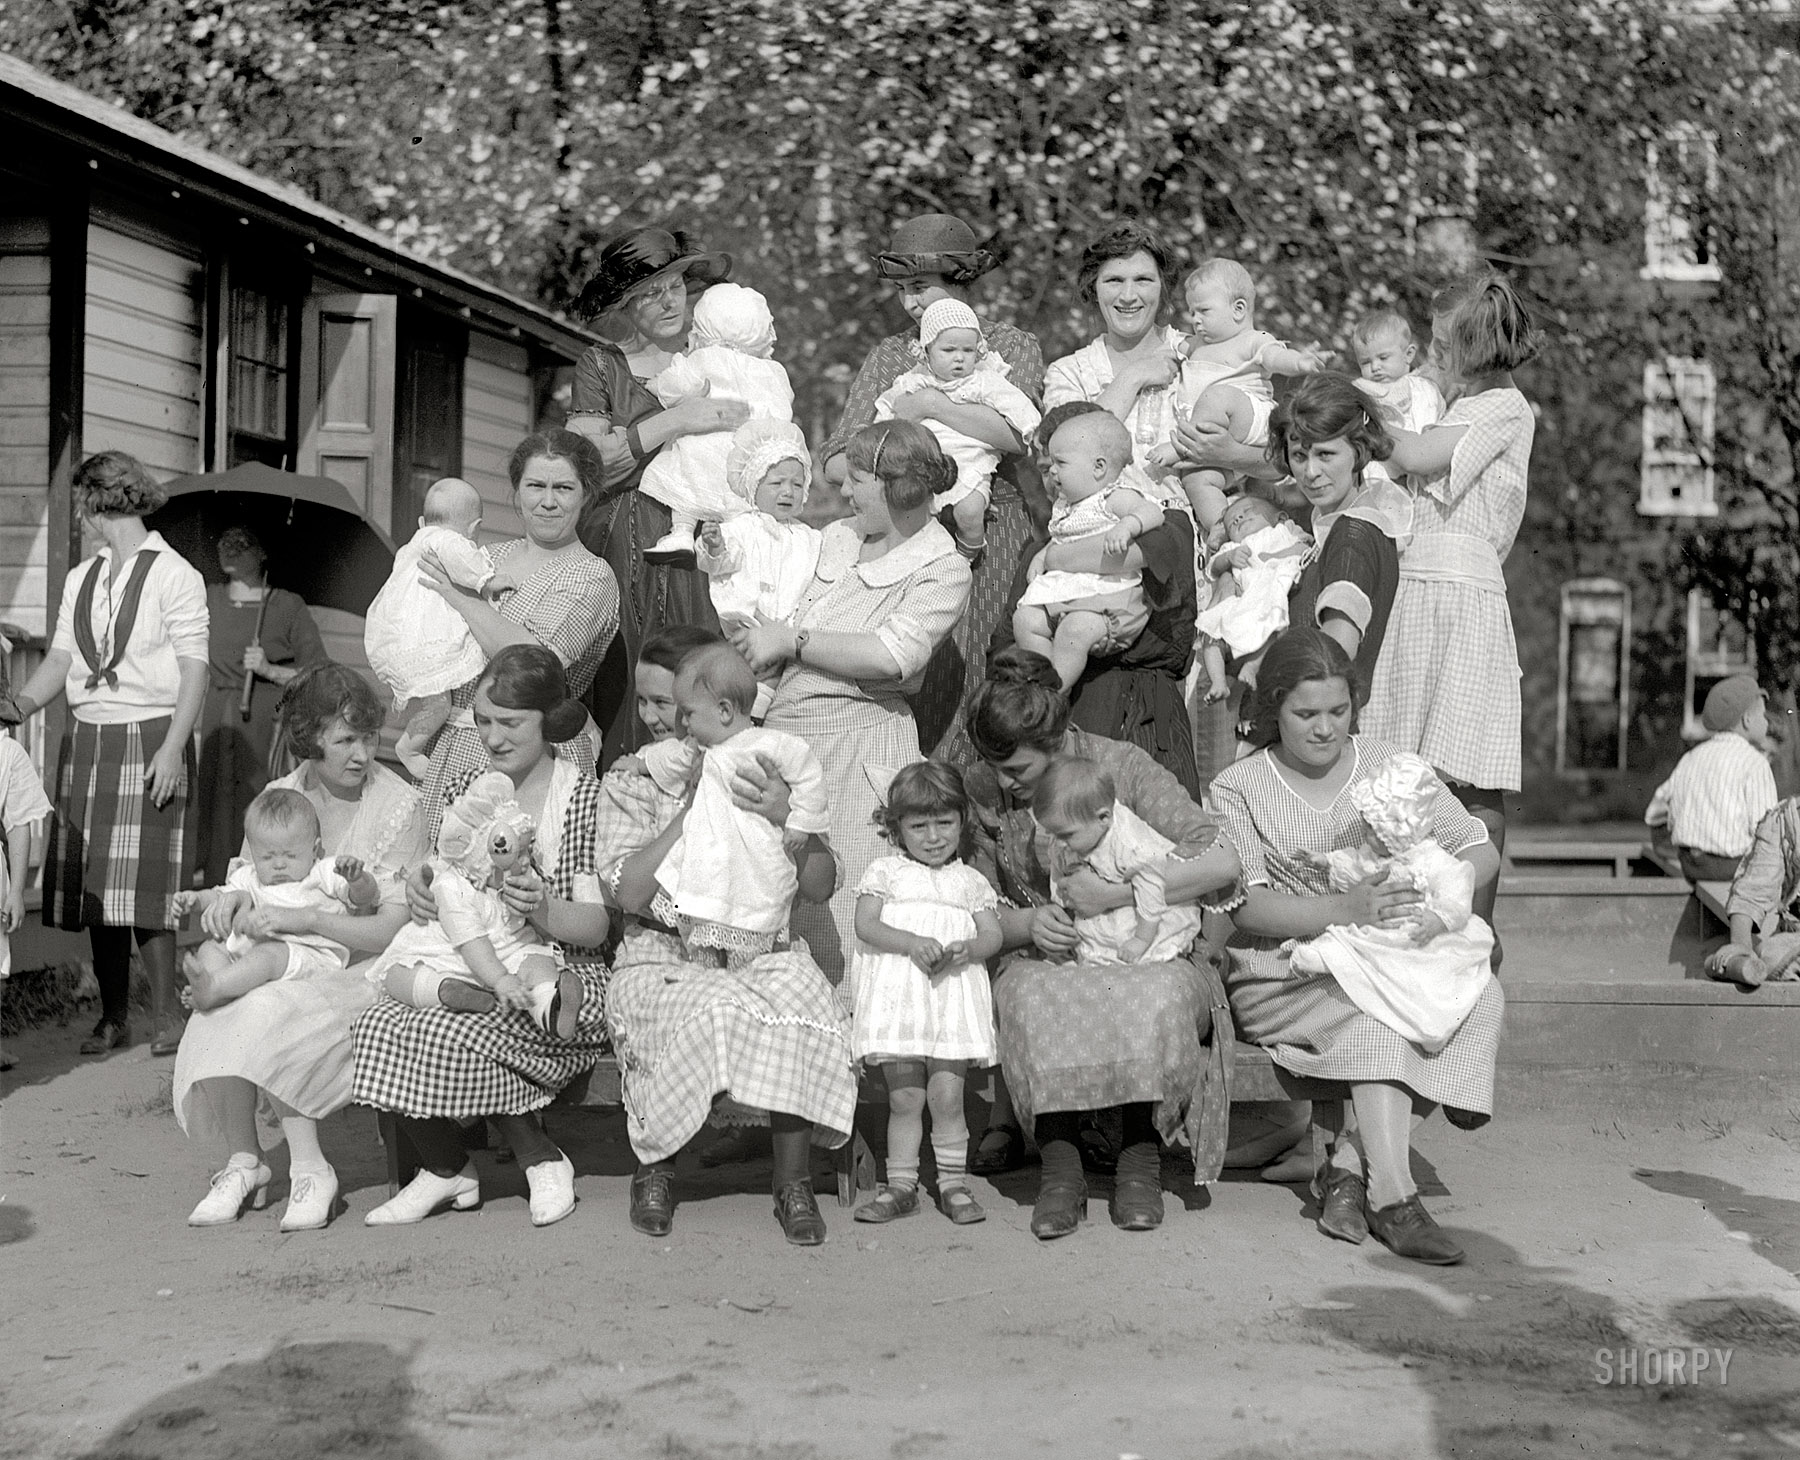 August 29, 1922. Washington, D.C. "Plaza baby show." Happy Mother's Day from Shorpy! National Photo Company Collection glass negative. View full size.